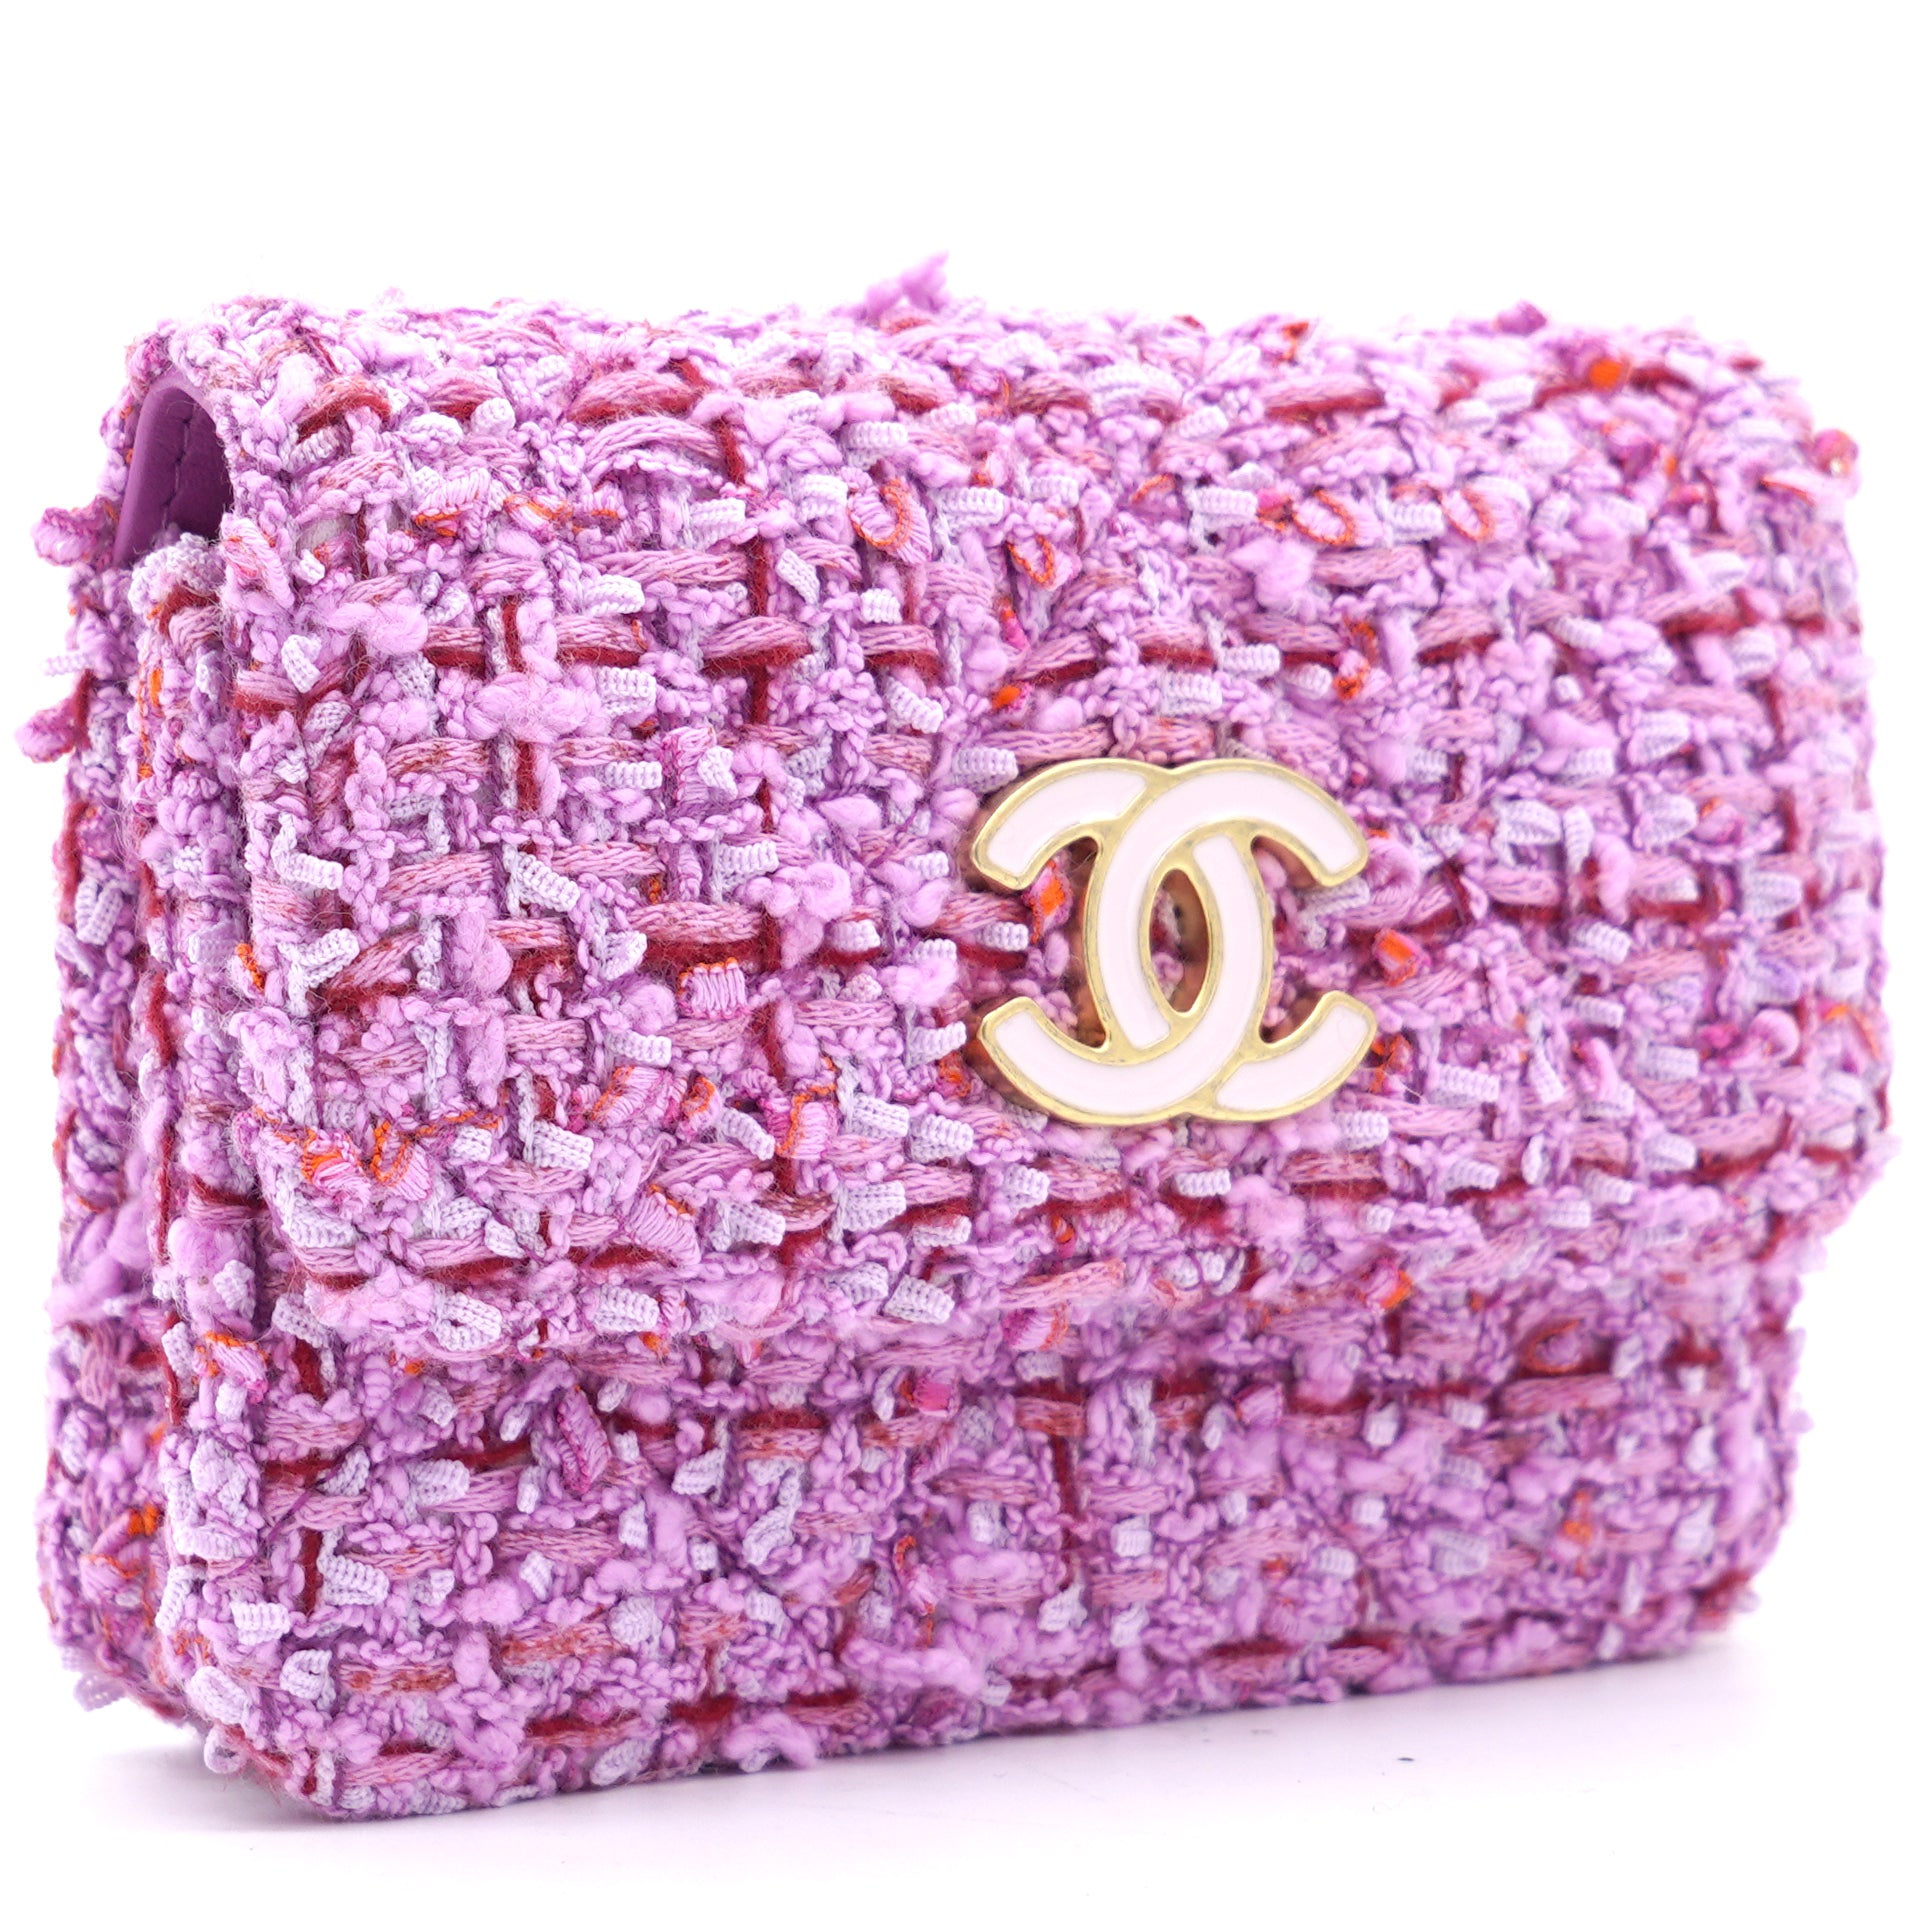 my wallet is happy with this decision #minibags #chanel #chanel22mini